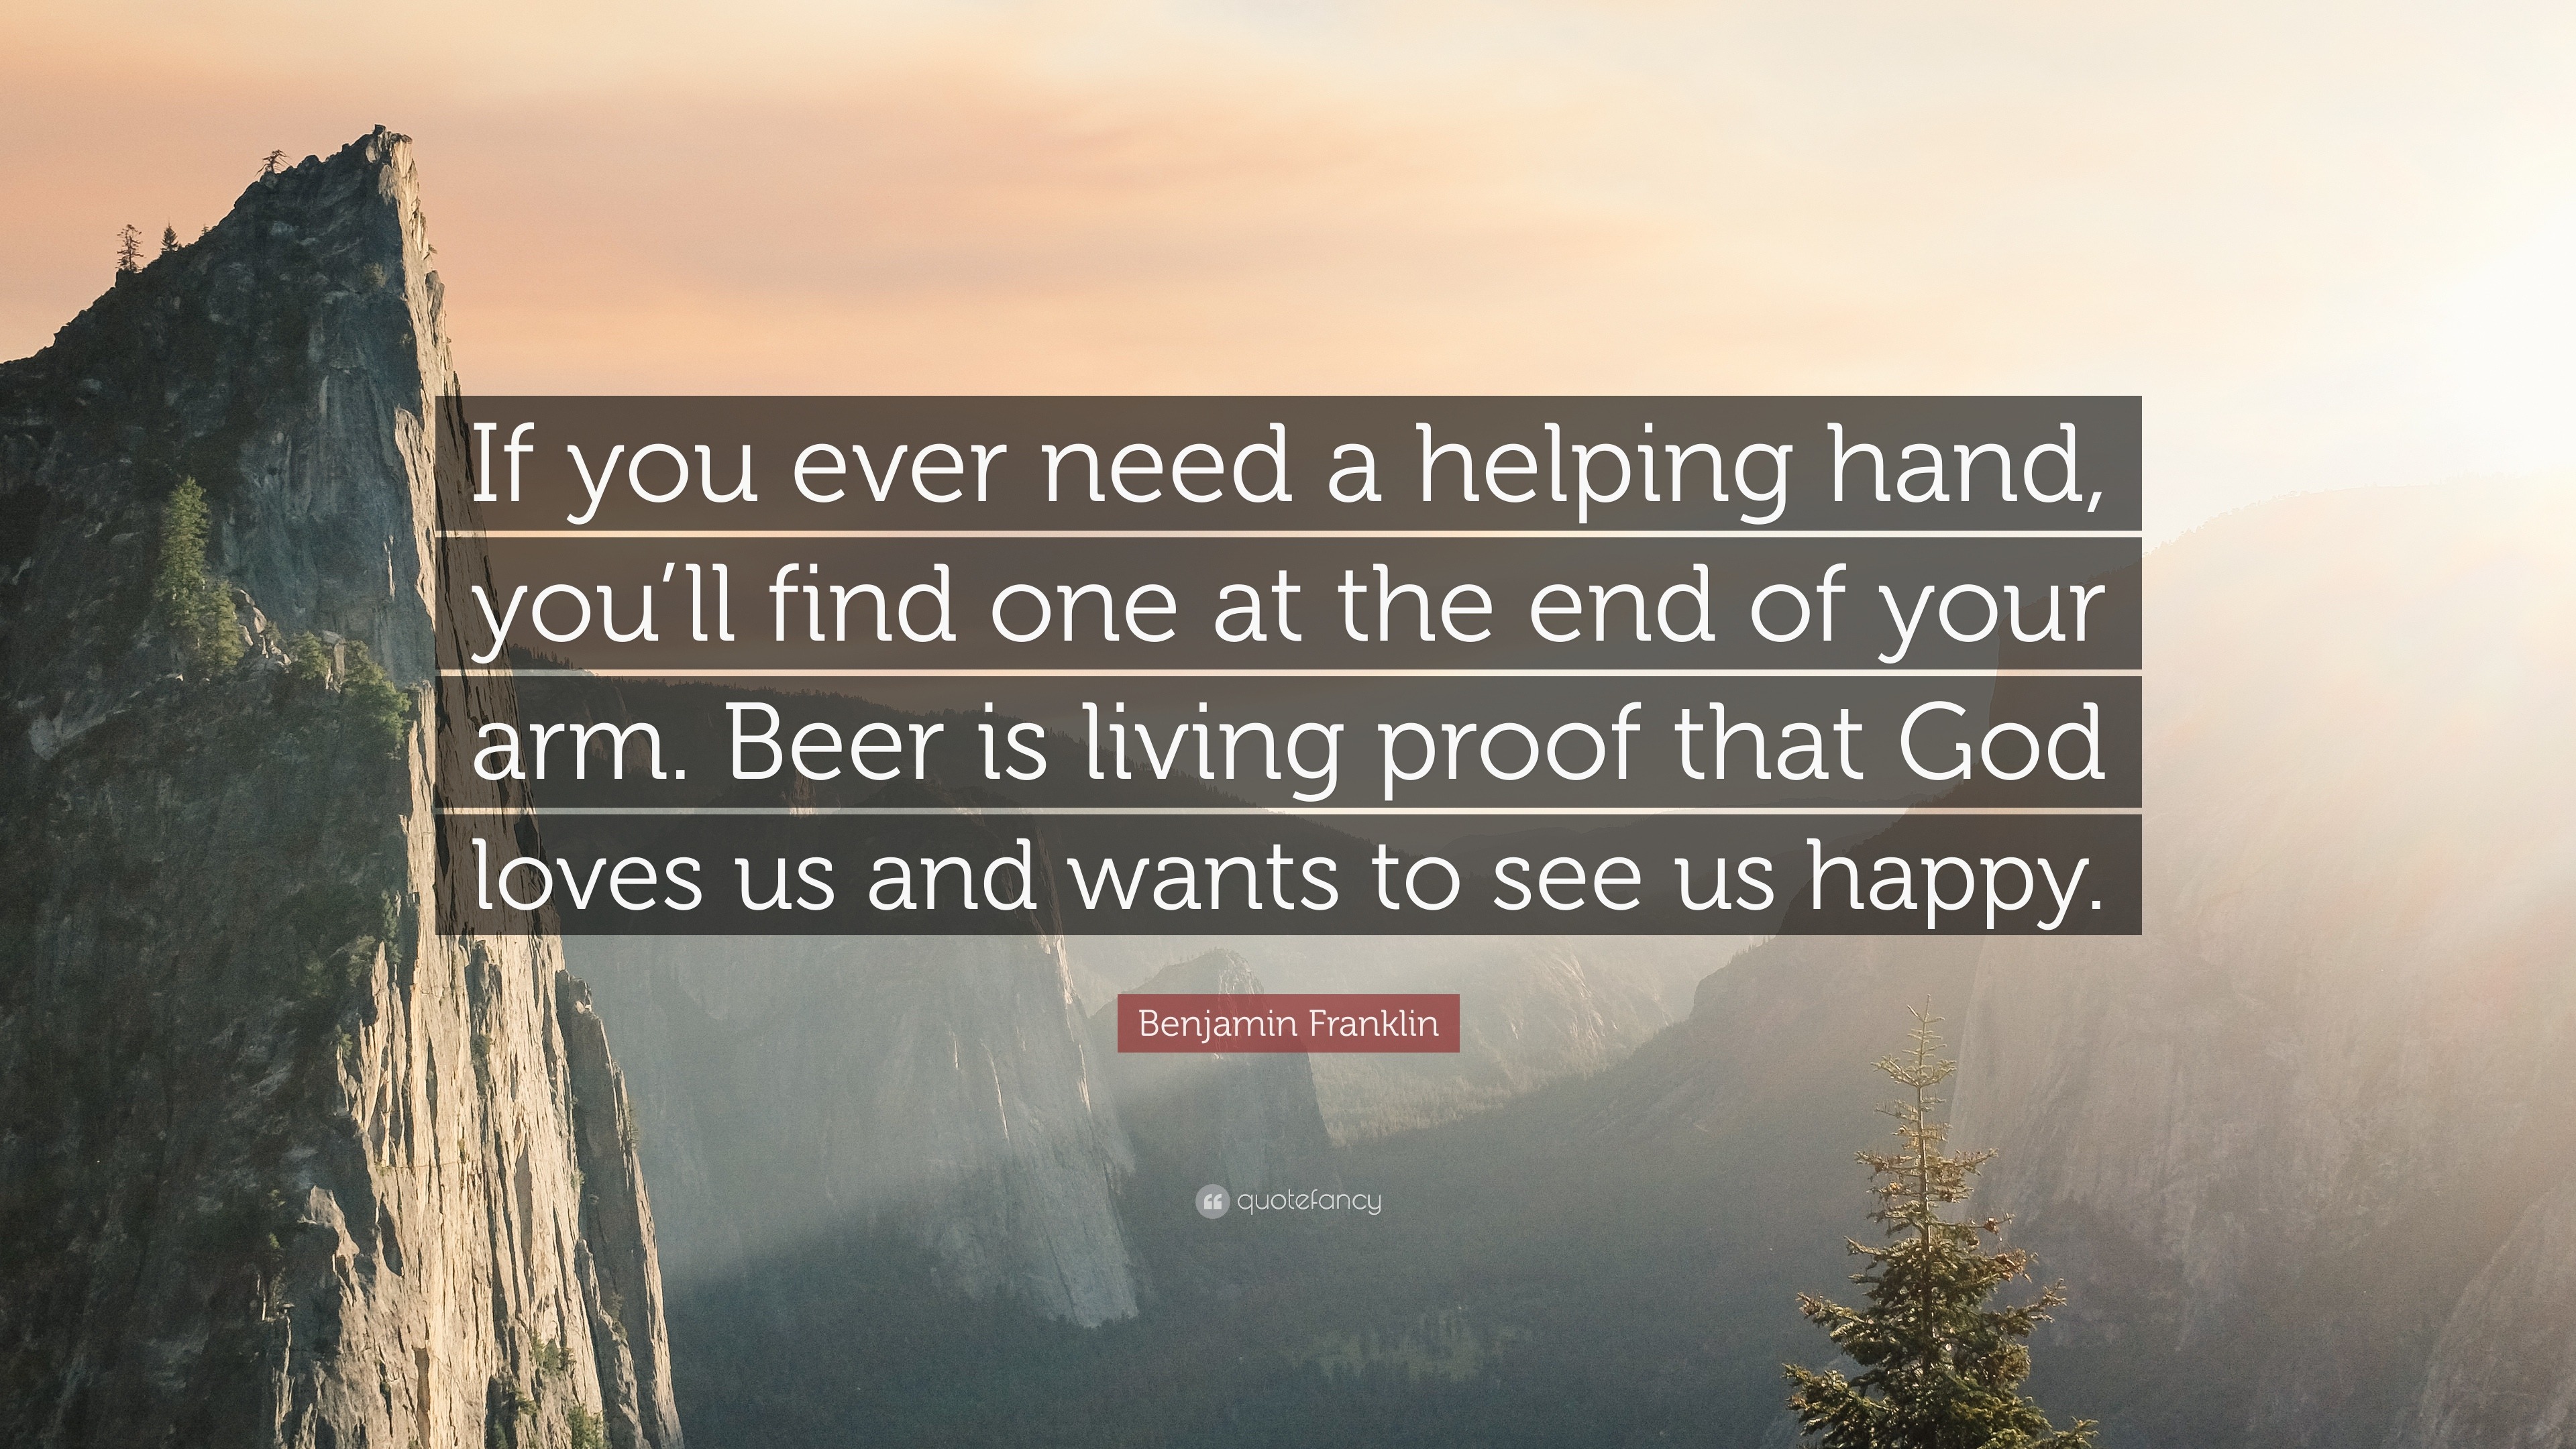 Benjamin Franklin Quote “If you ever need a helping hand you ll